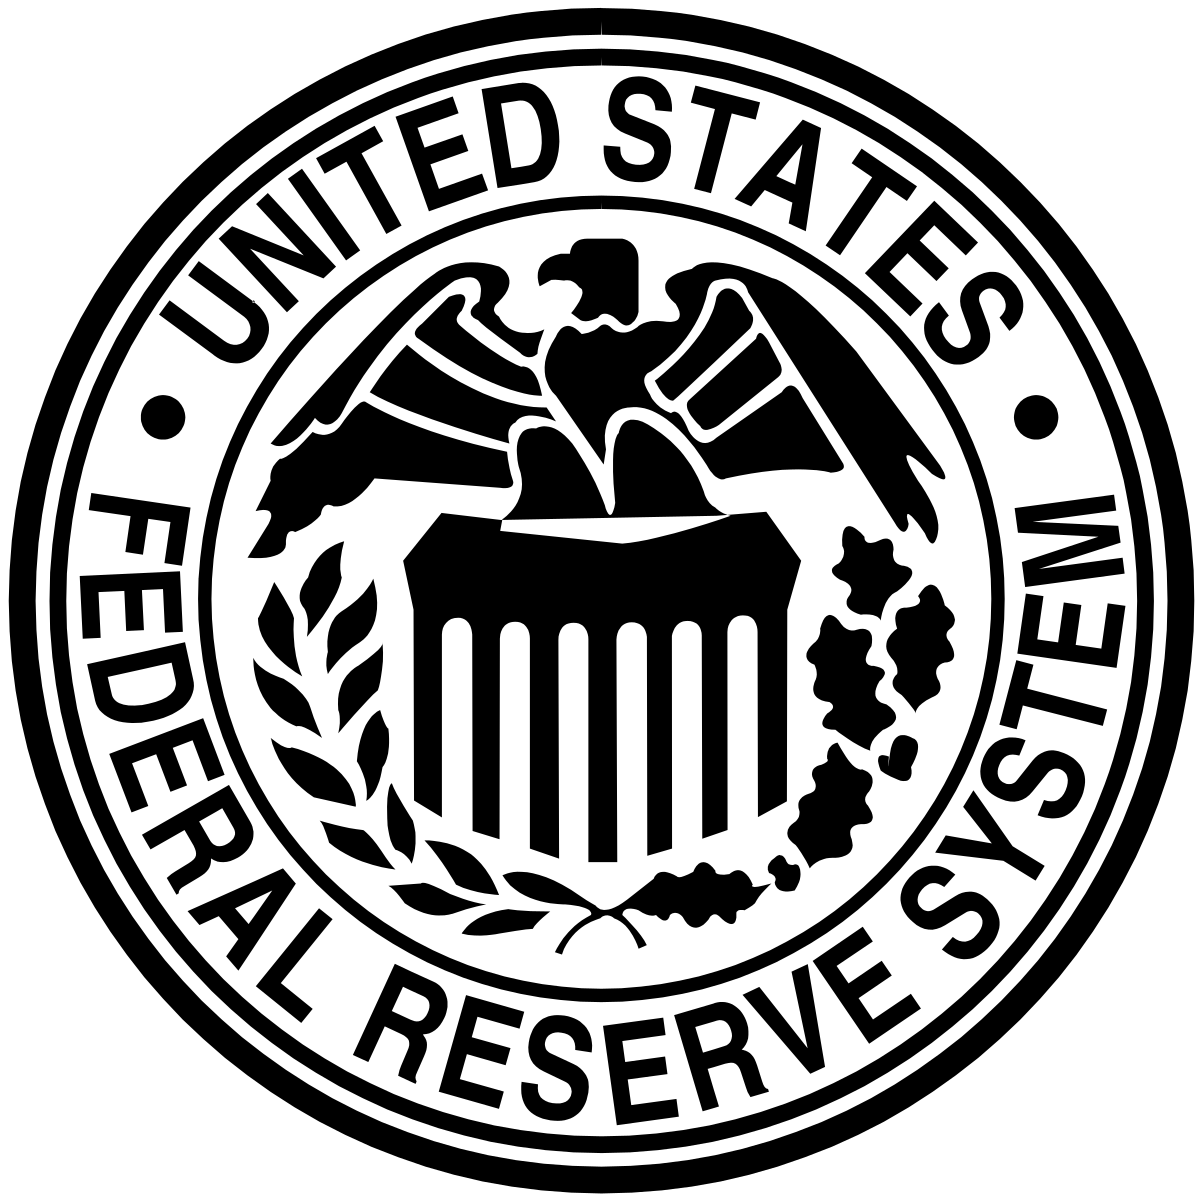 Federal Reserve Act